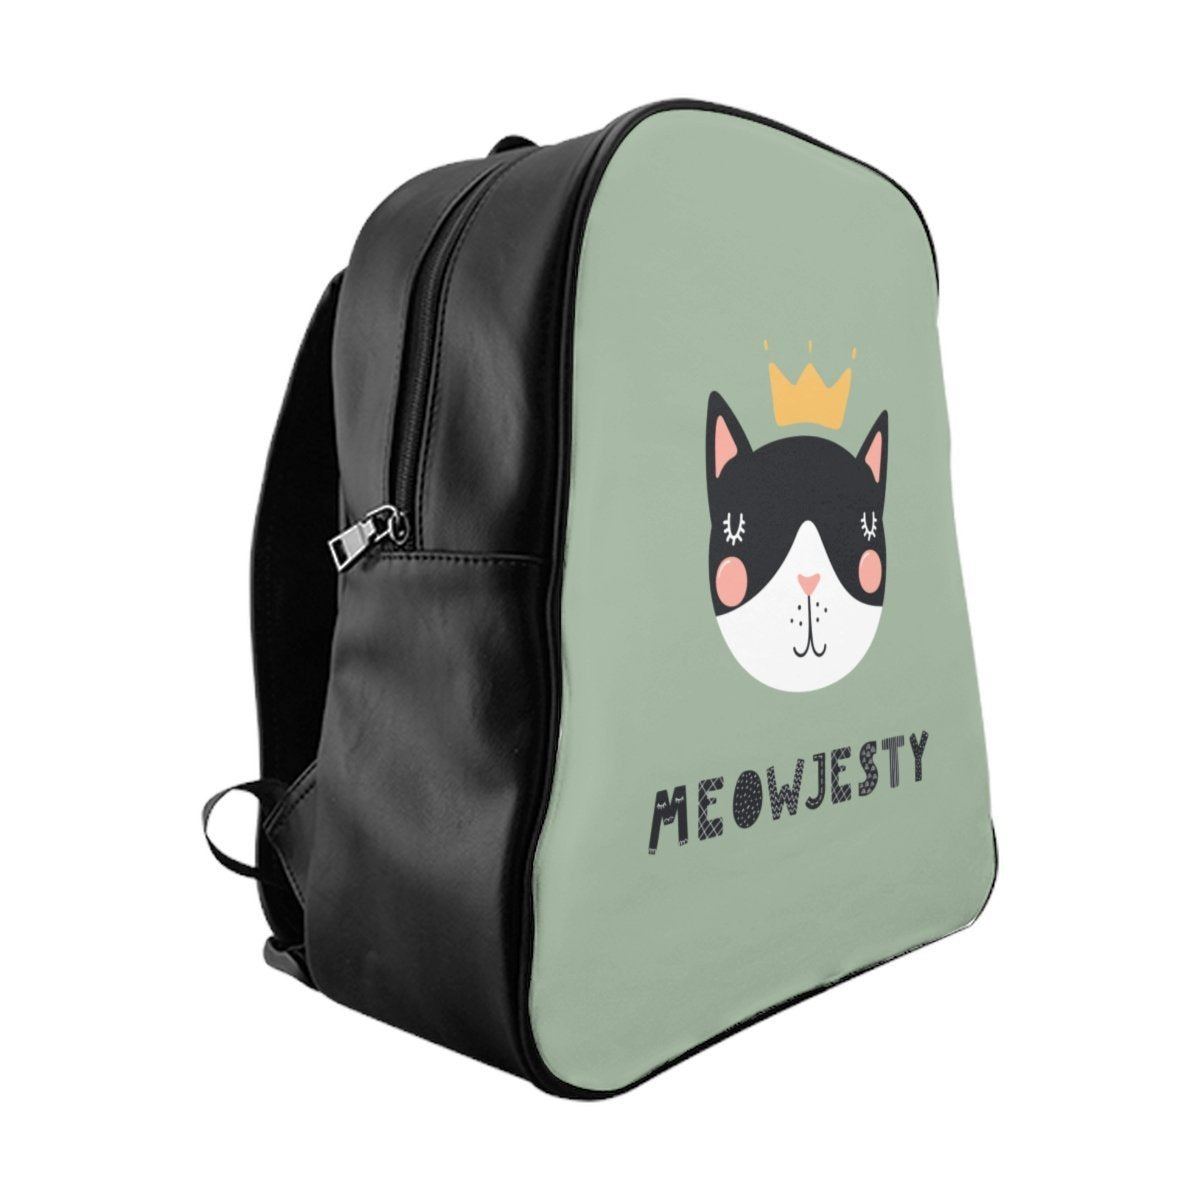 Unique Gifts for Cat Lovers, Cute Cat Bag Featuring the Text Her Meowjesty and a Cat Printed On a Nature Green Leather